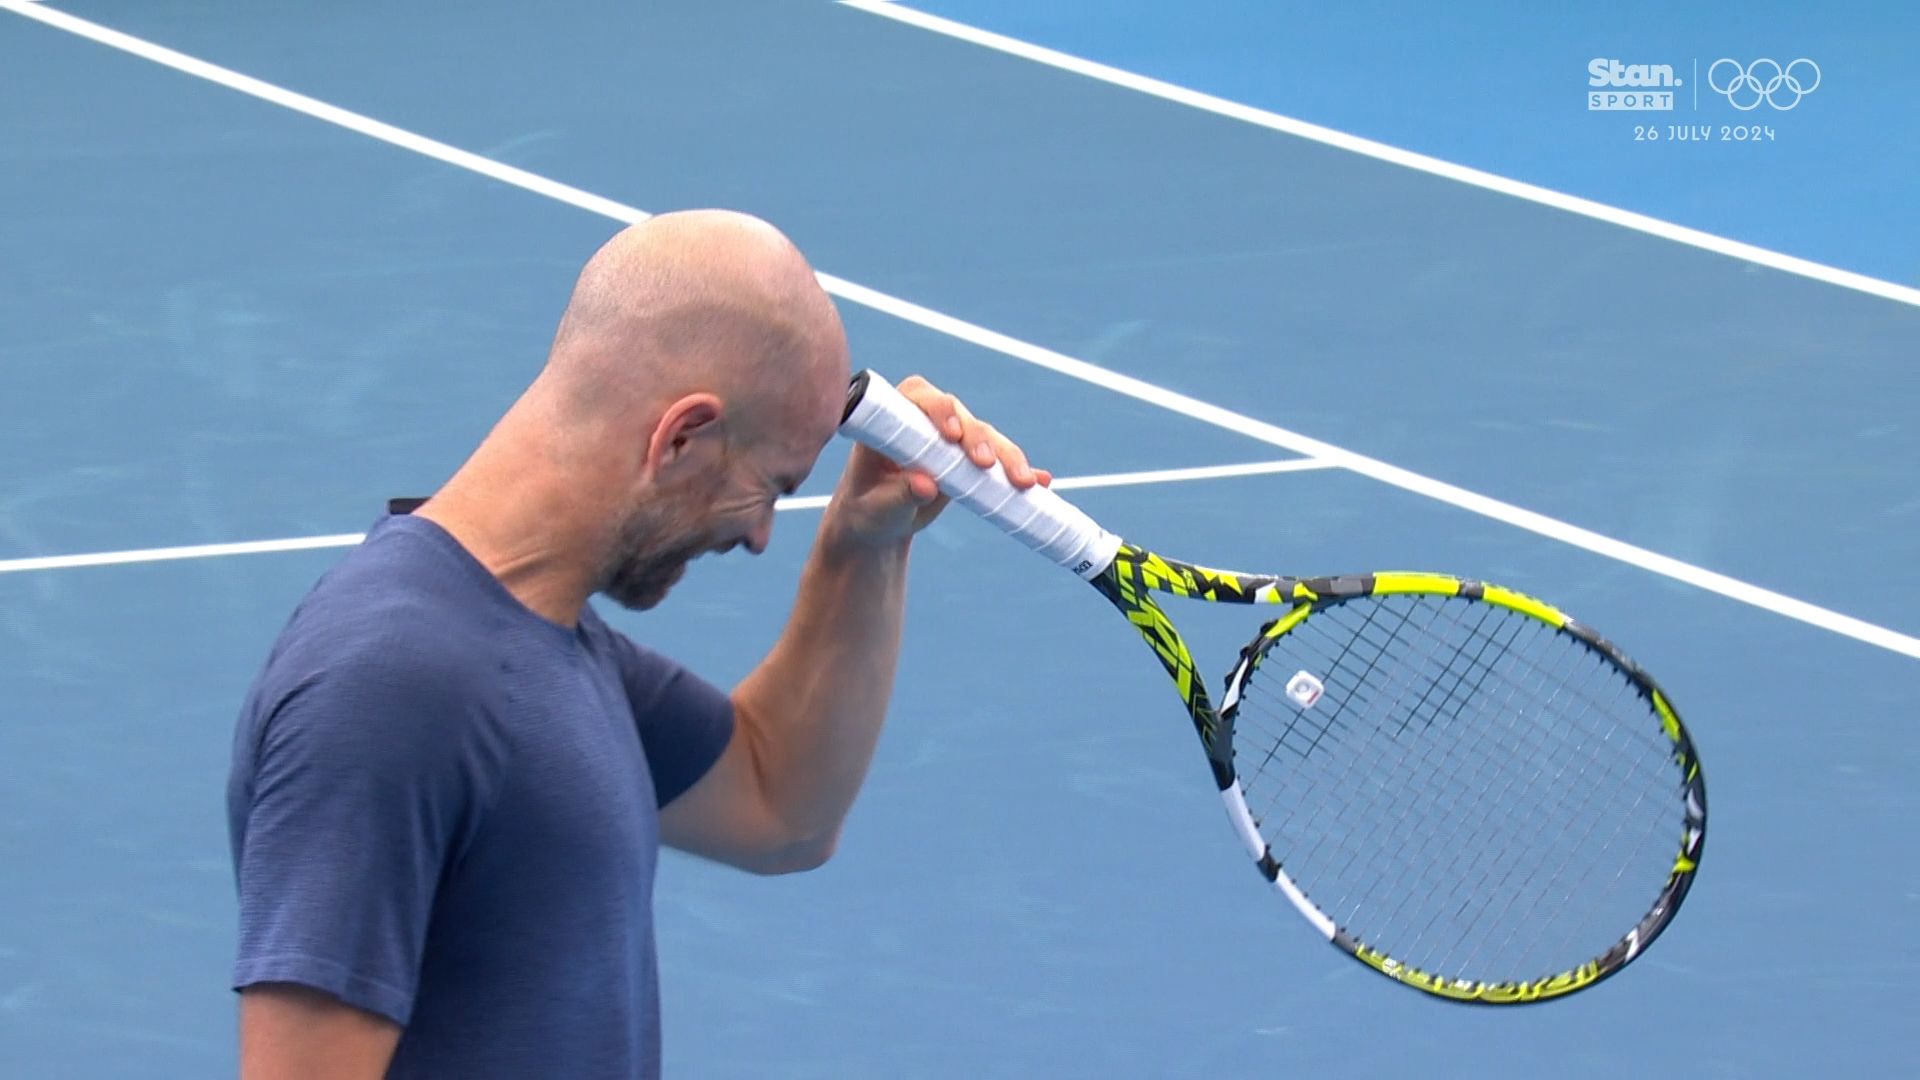 'Not a good look for the sport': Fury as star hits himself with racquet, takes medical timeout